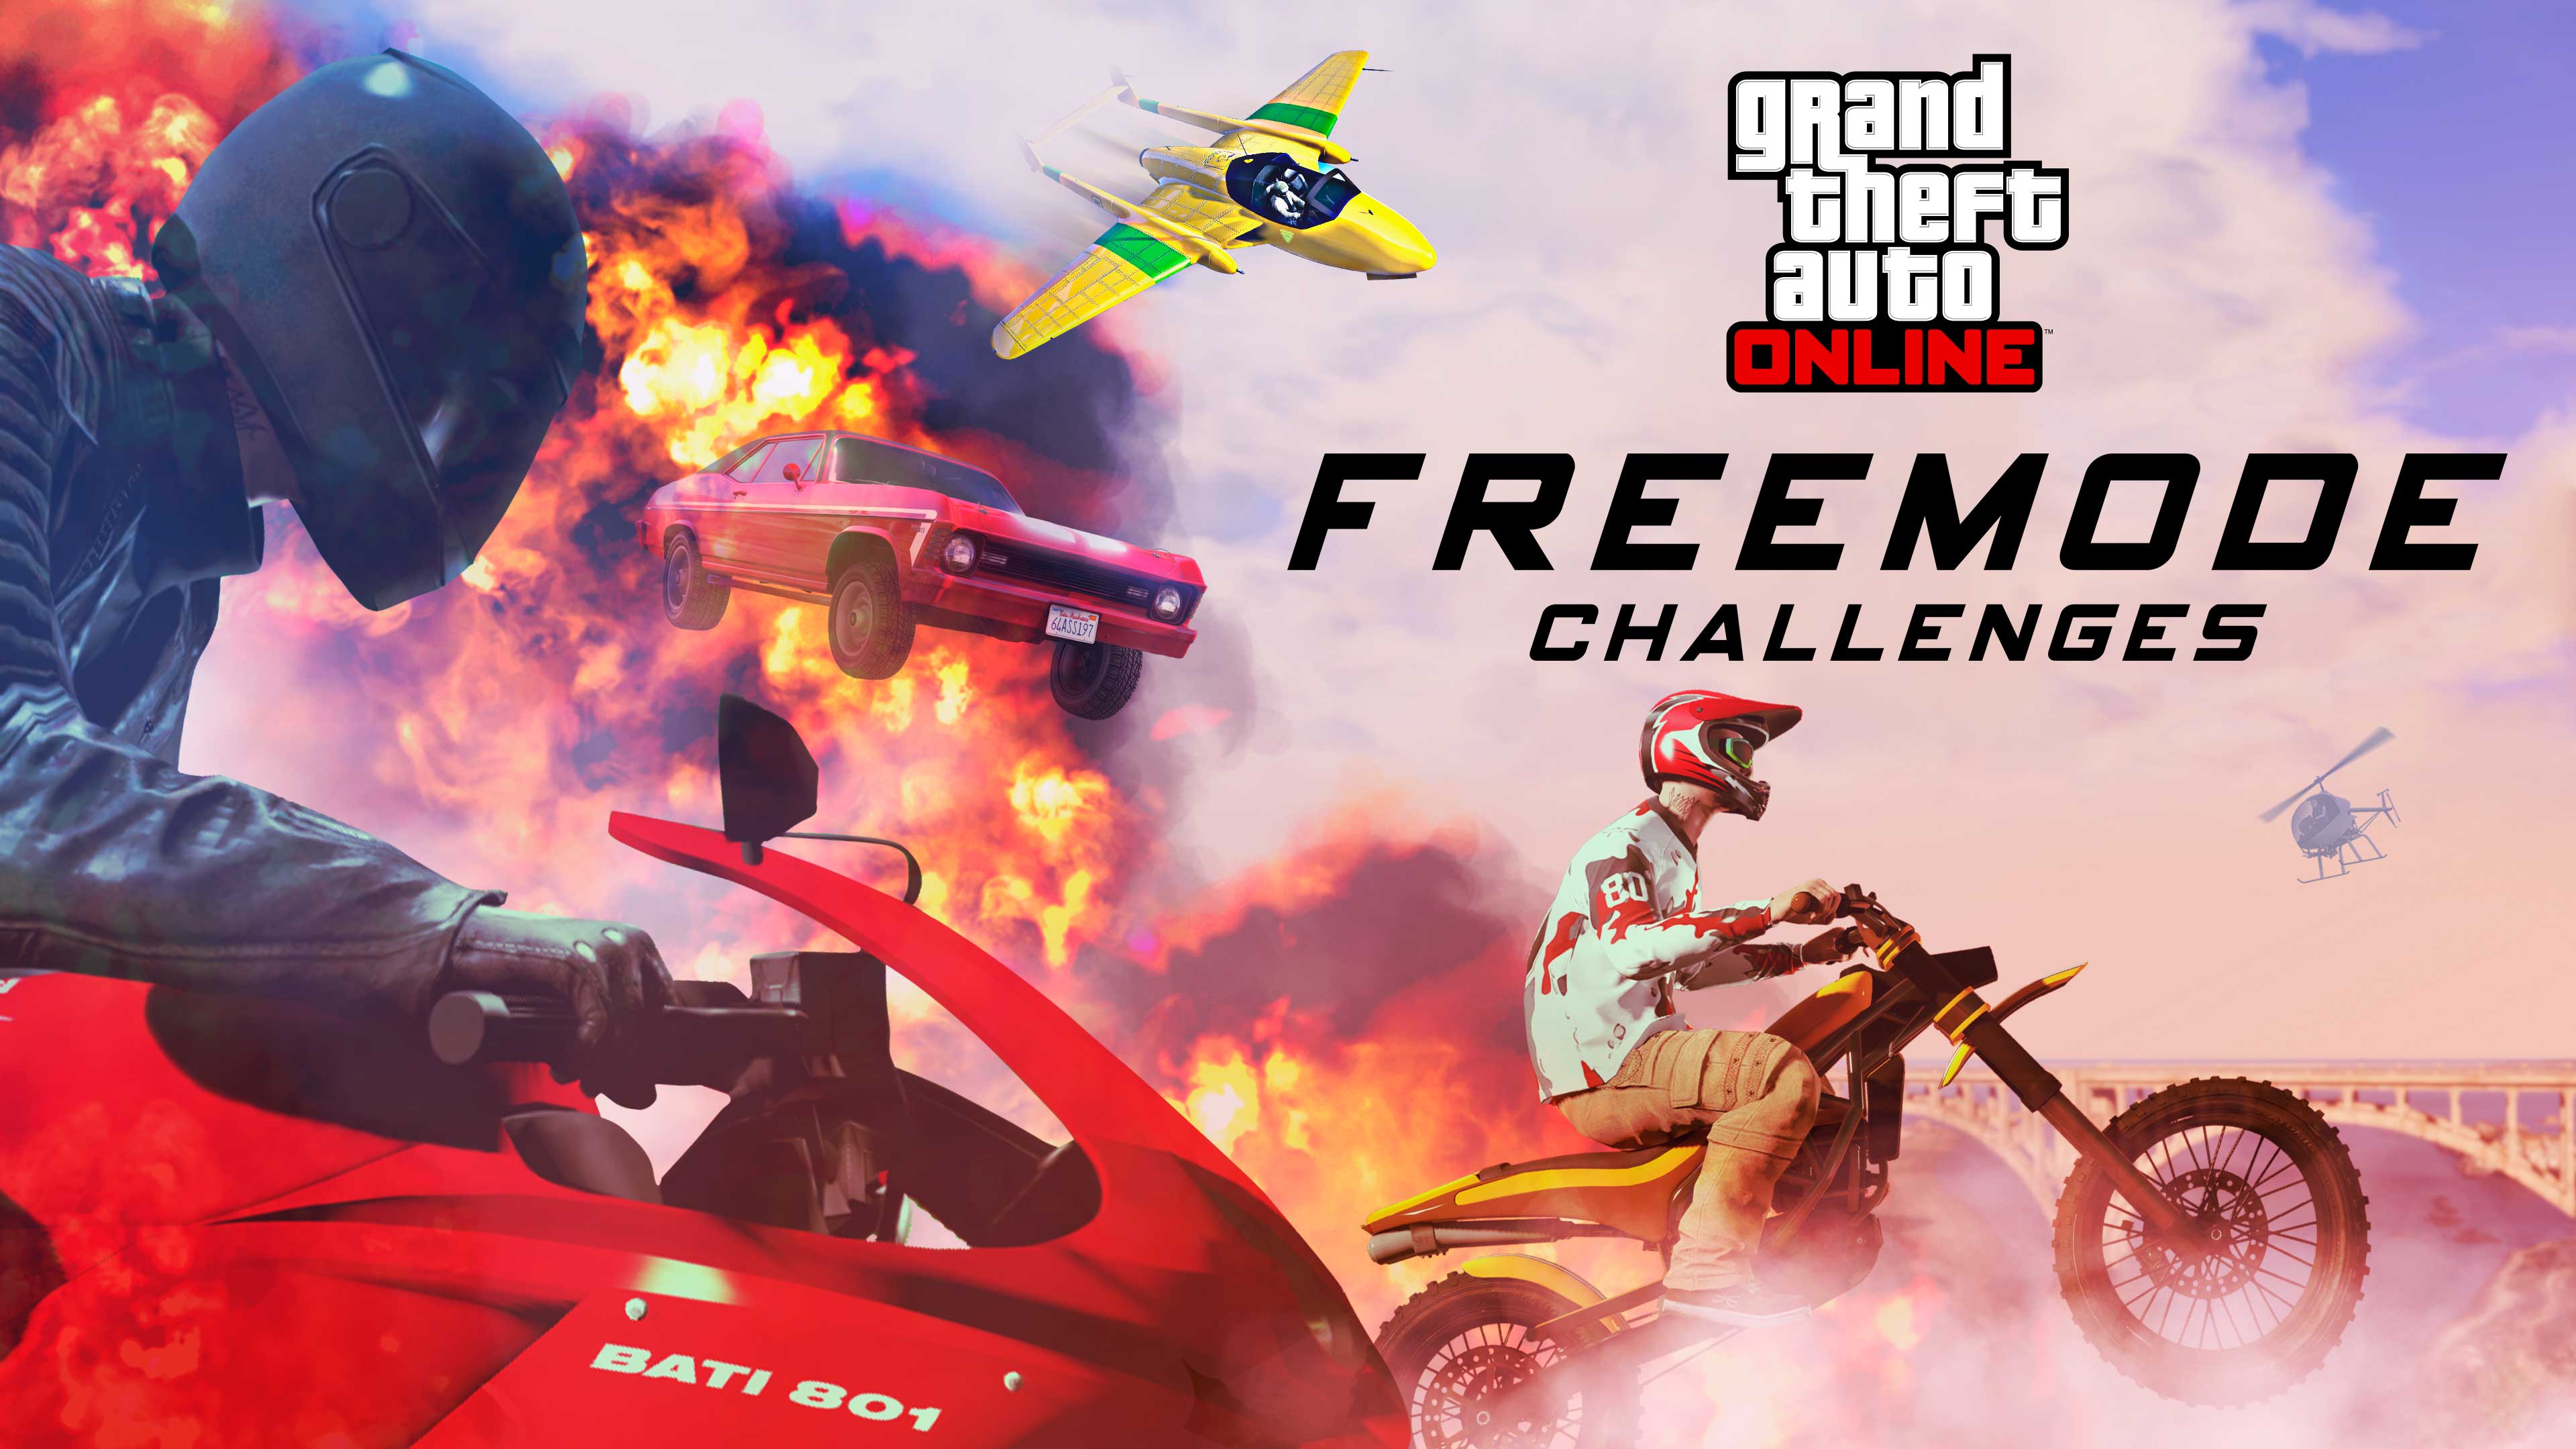 3x and rp on freemode challenges